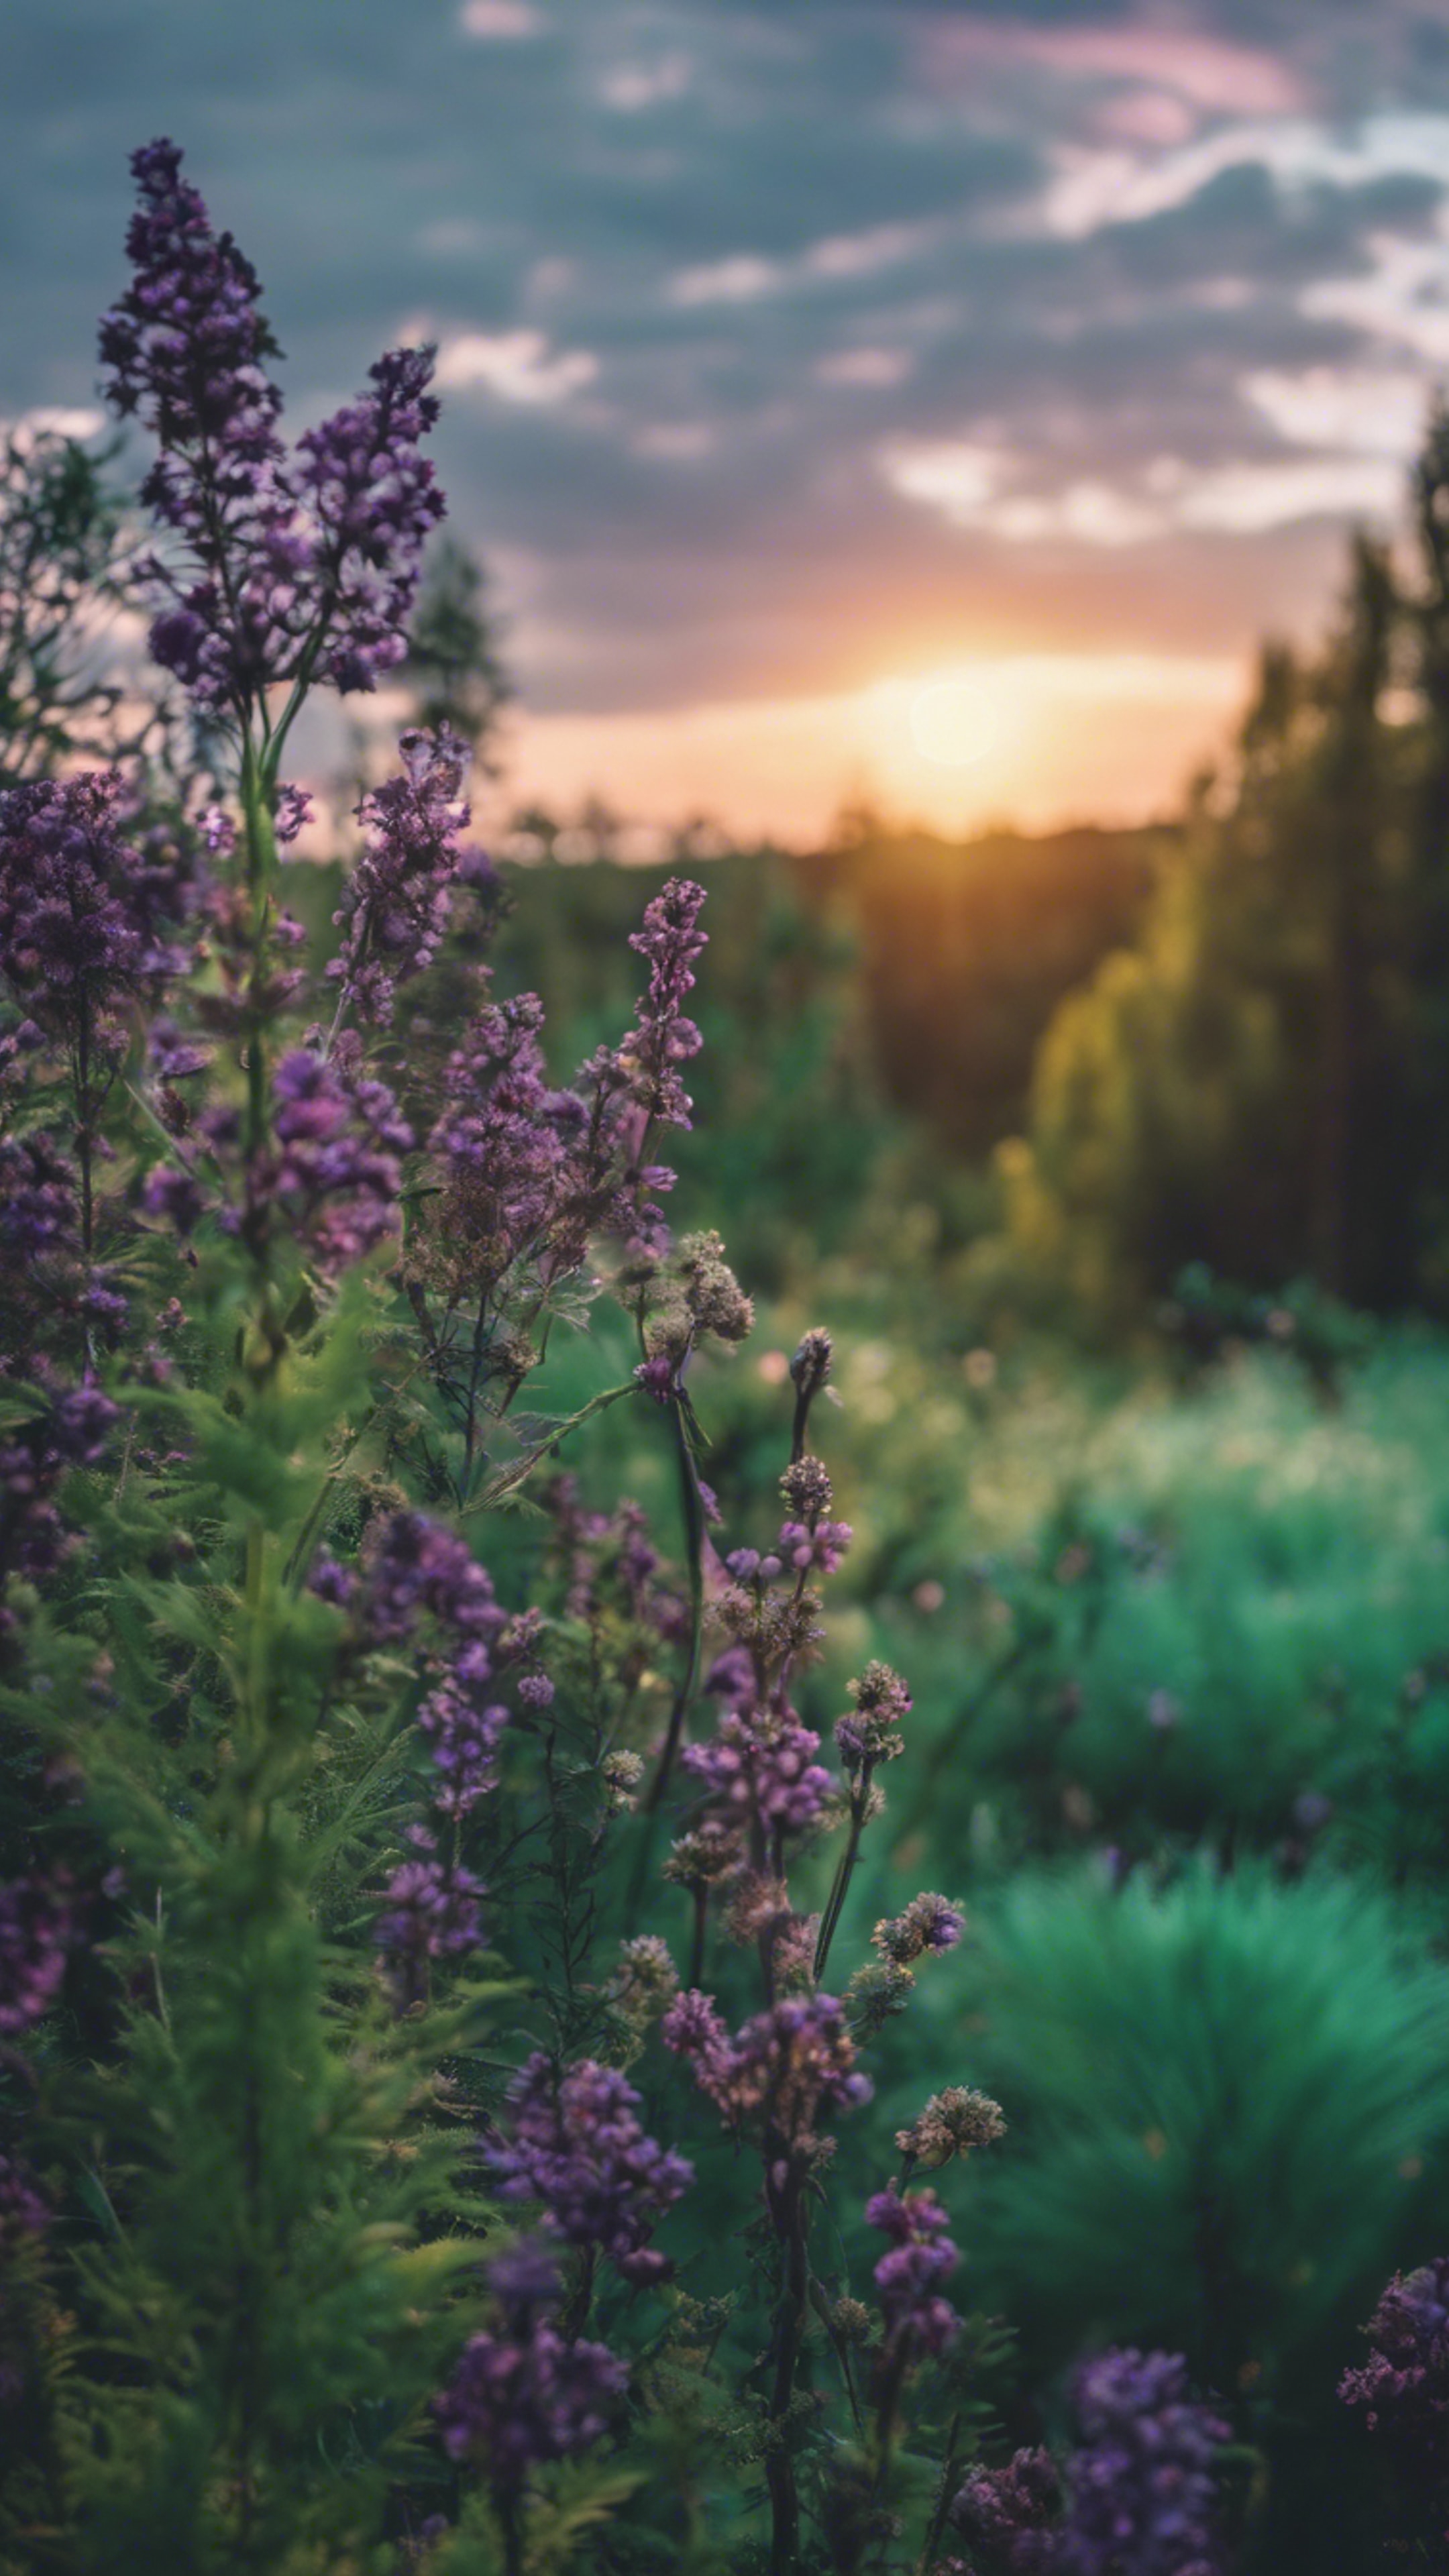 A malachite green forest with patches of black and purple wildflowers under the setting sun. Wallpaper[da22d74044274e43bbbd]